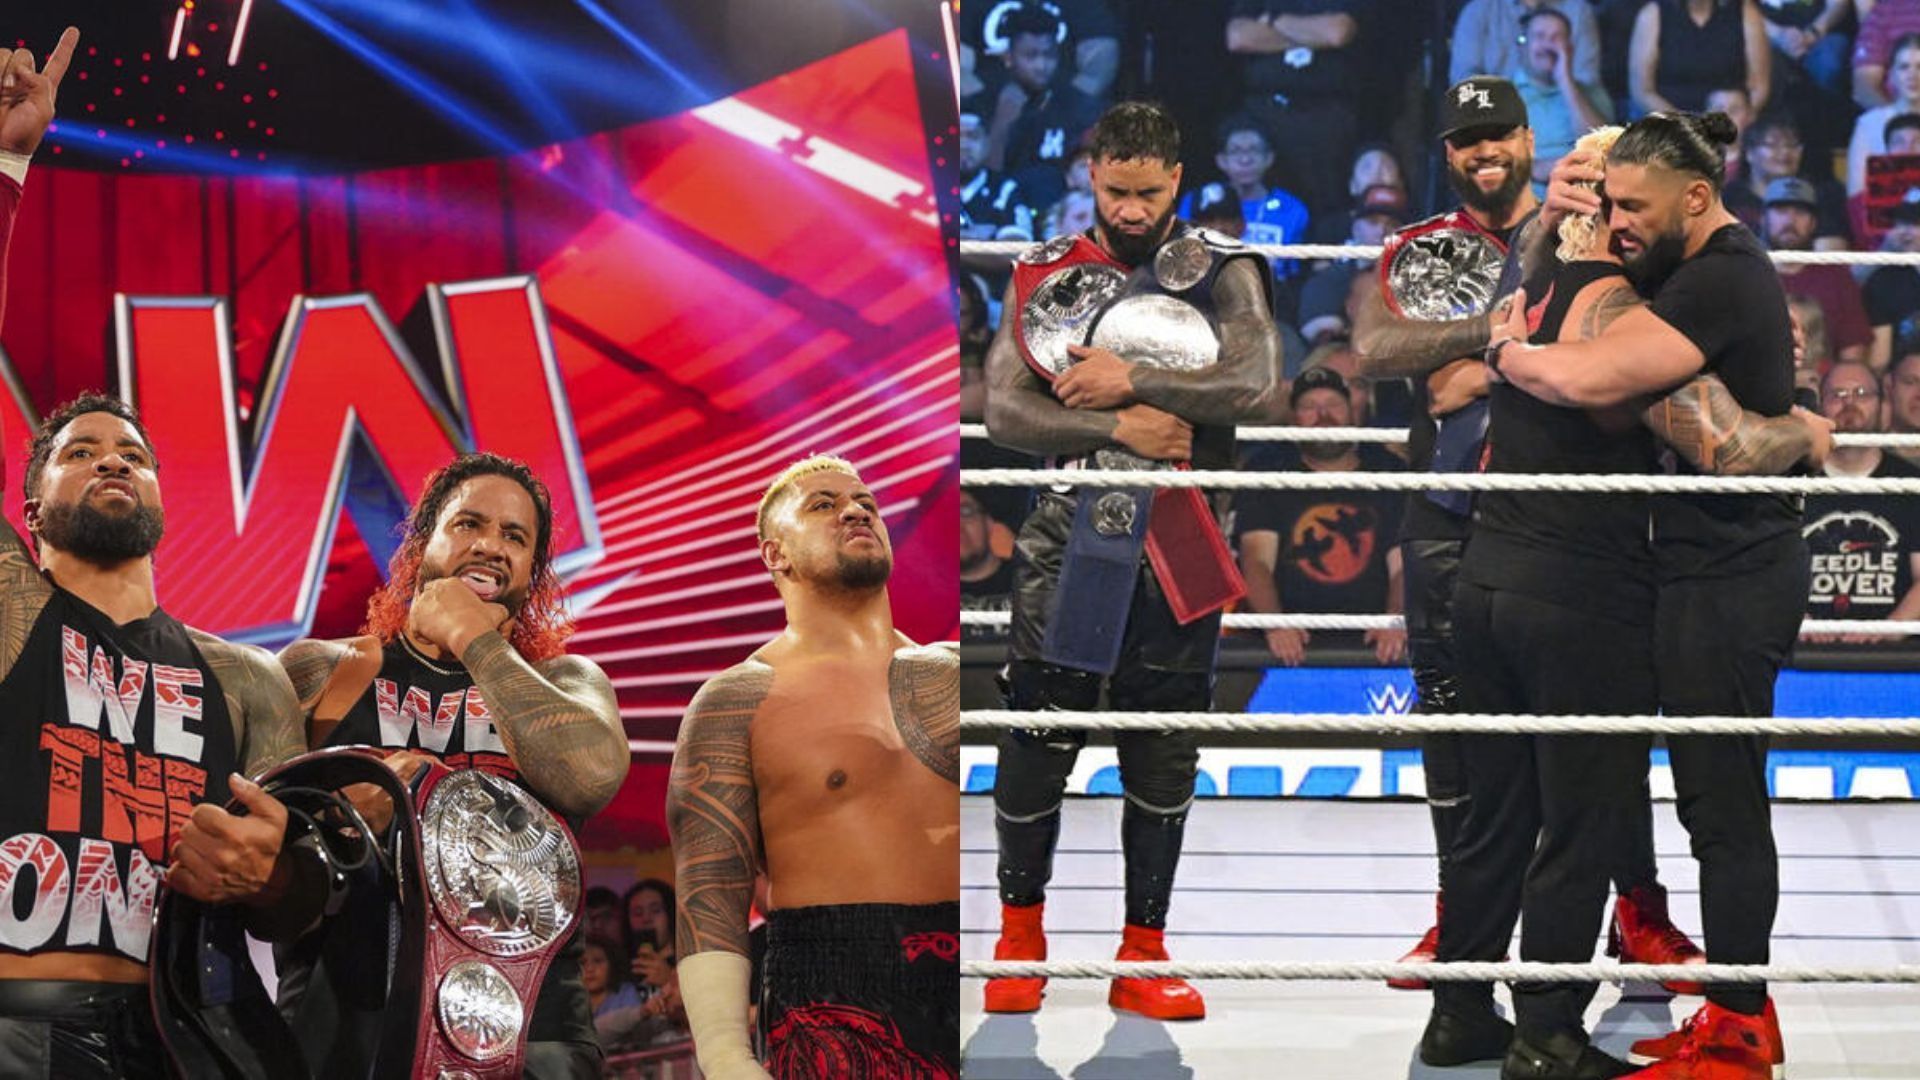 Jimmy Uso is a former member of The Bloodline